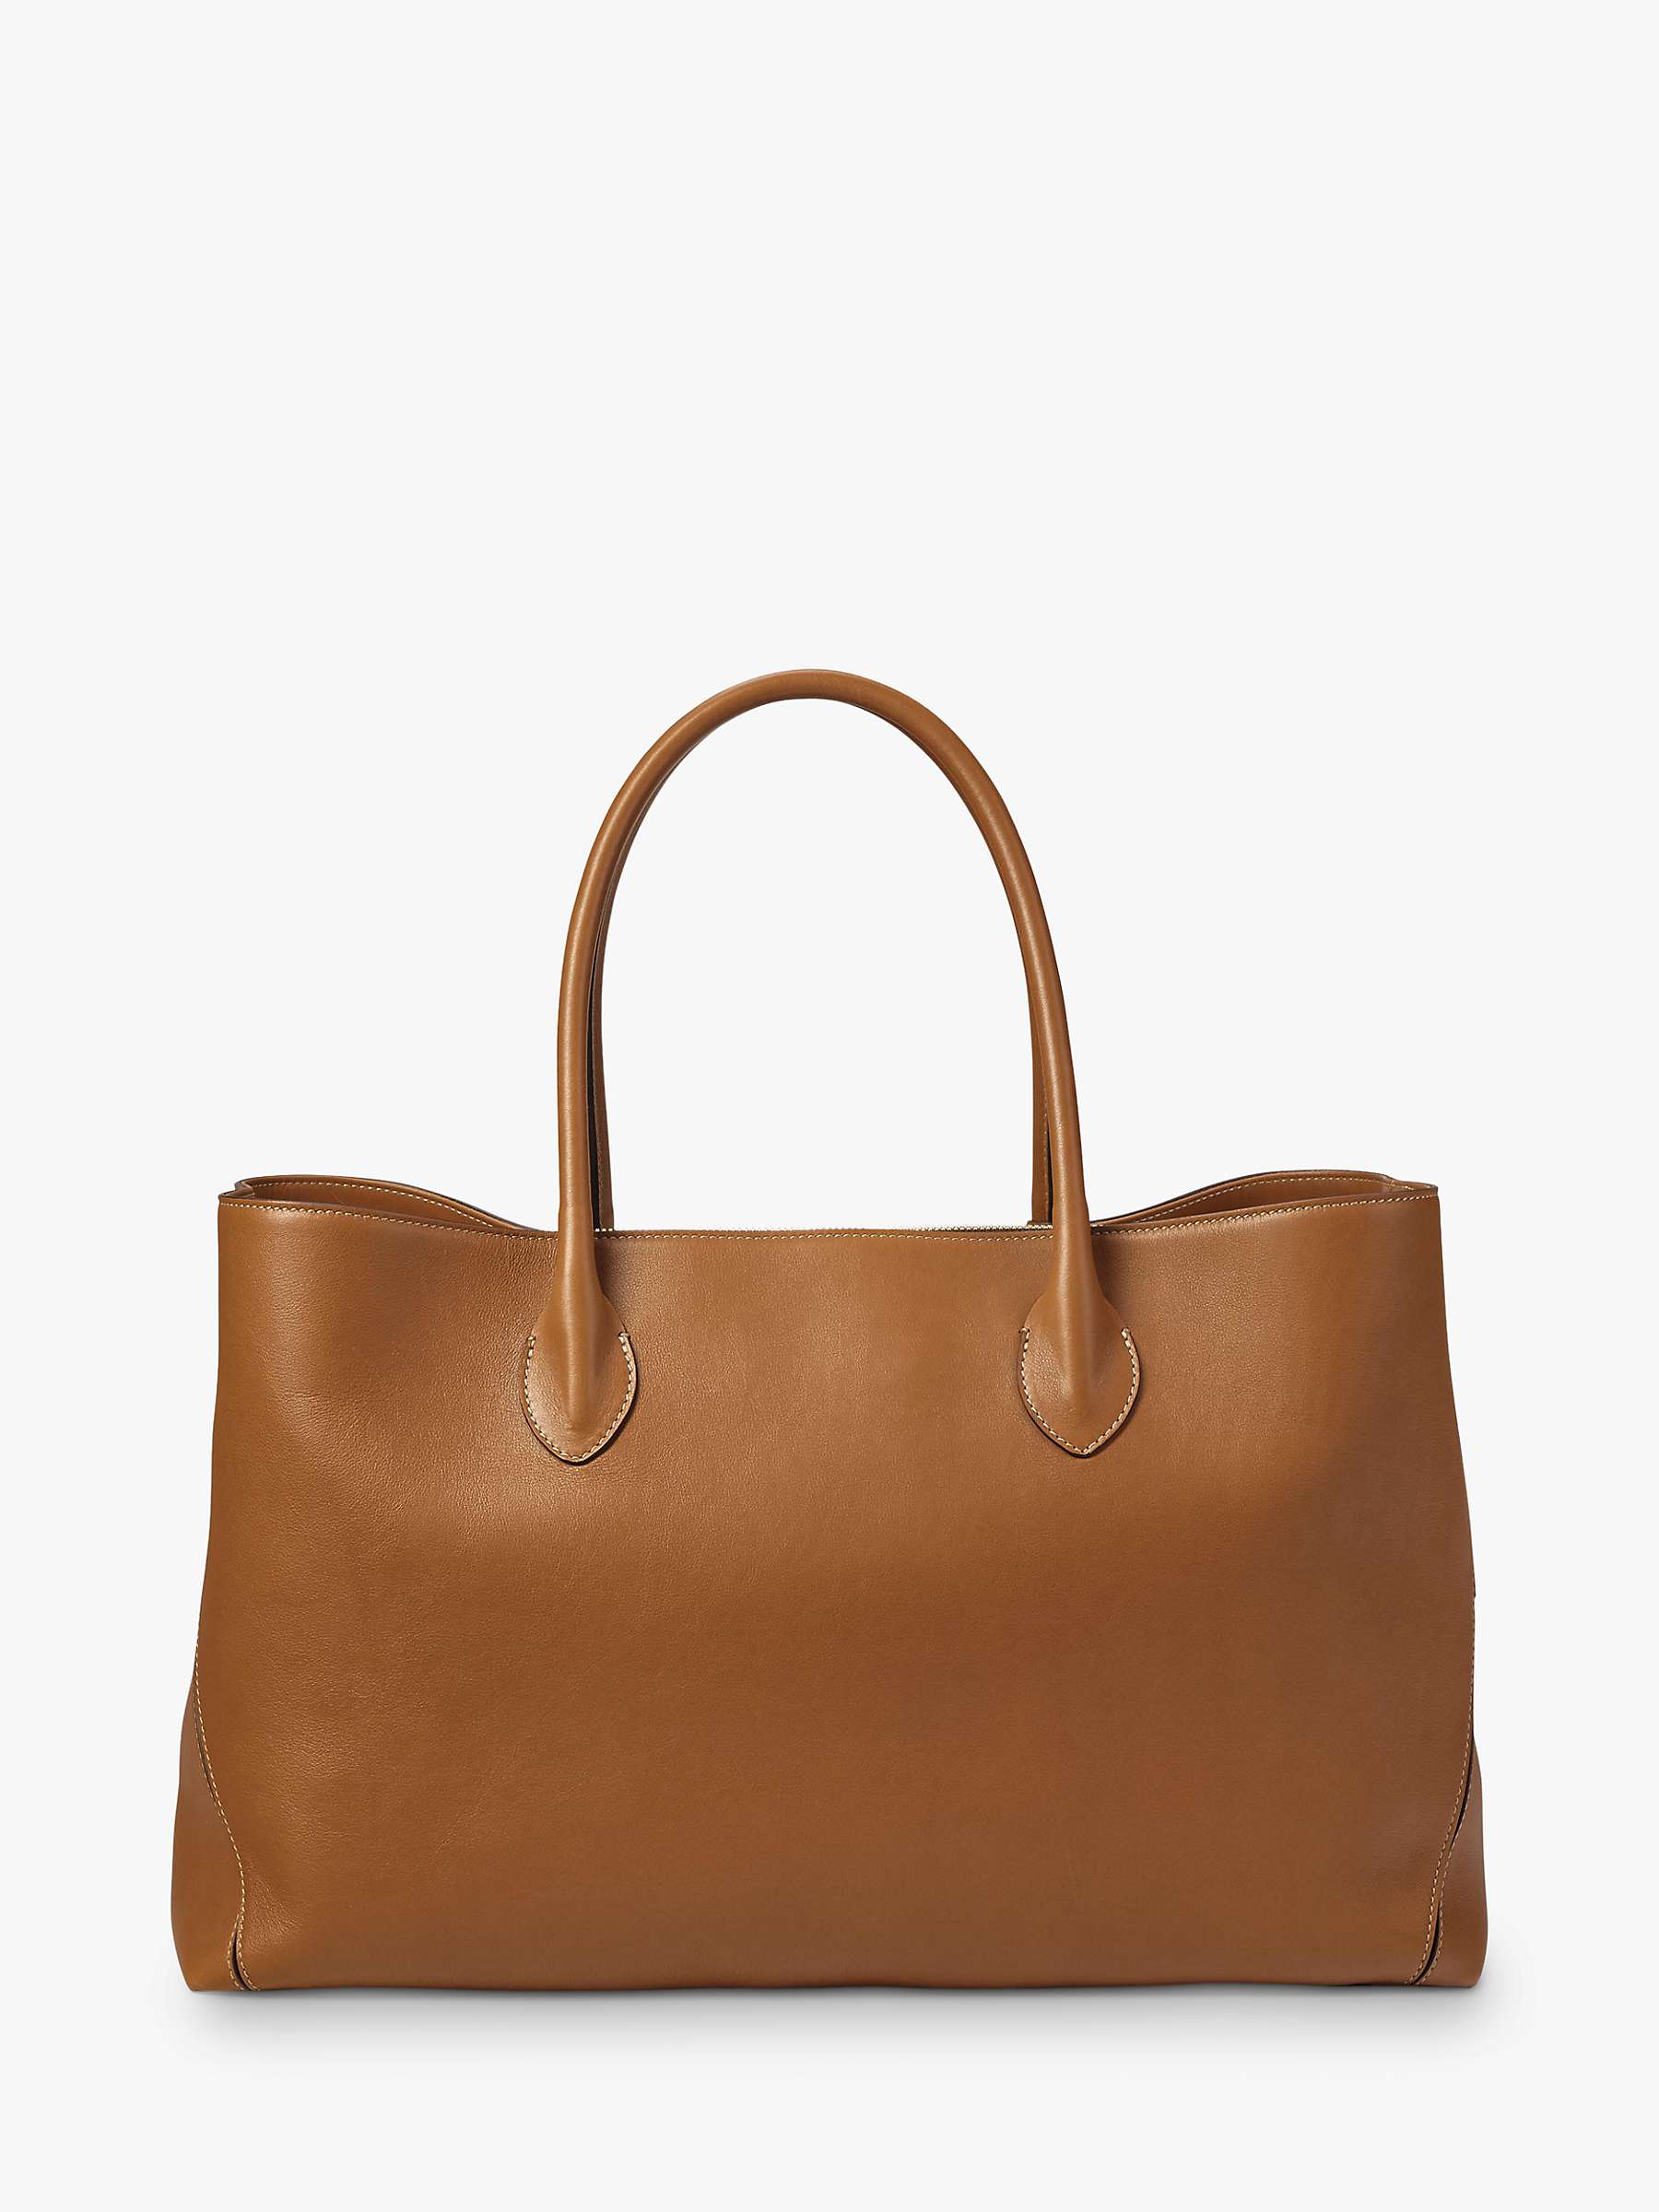 Buy Aspinal of London Large London Smooth Leather Tote Bag, Tan Online at johnlewis.com